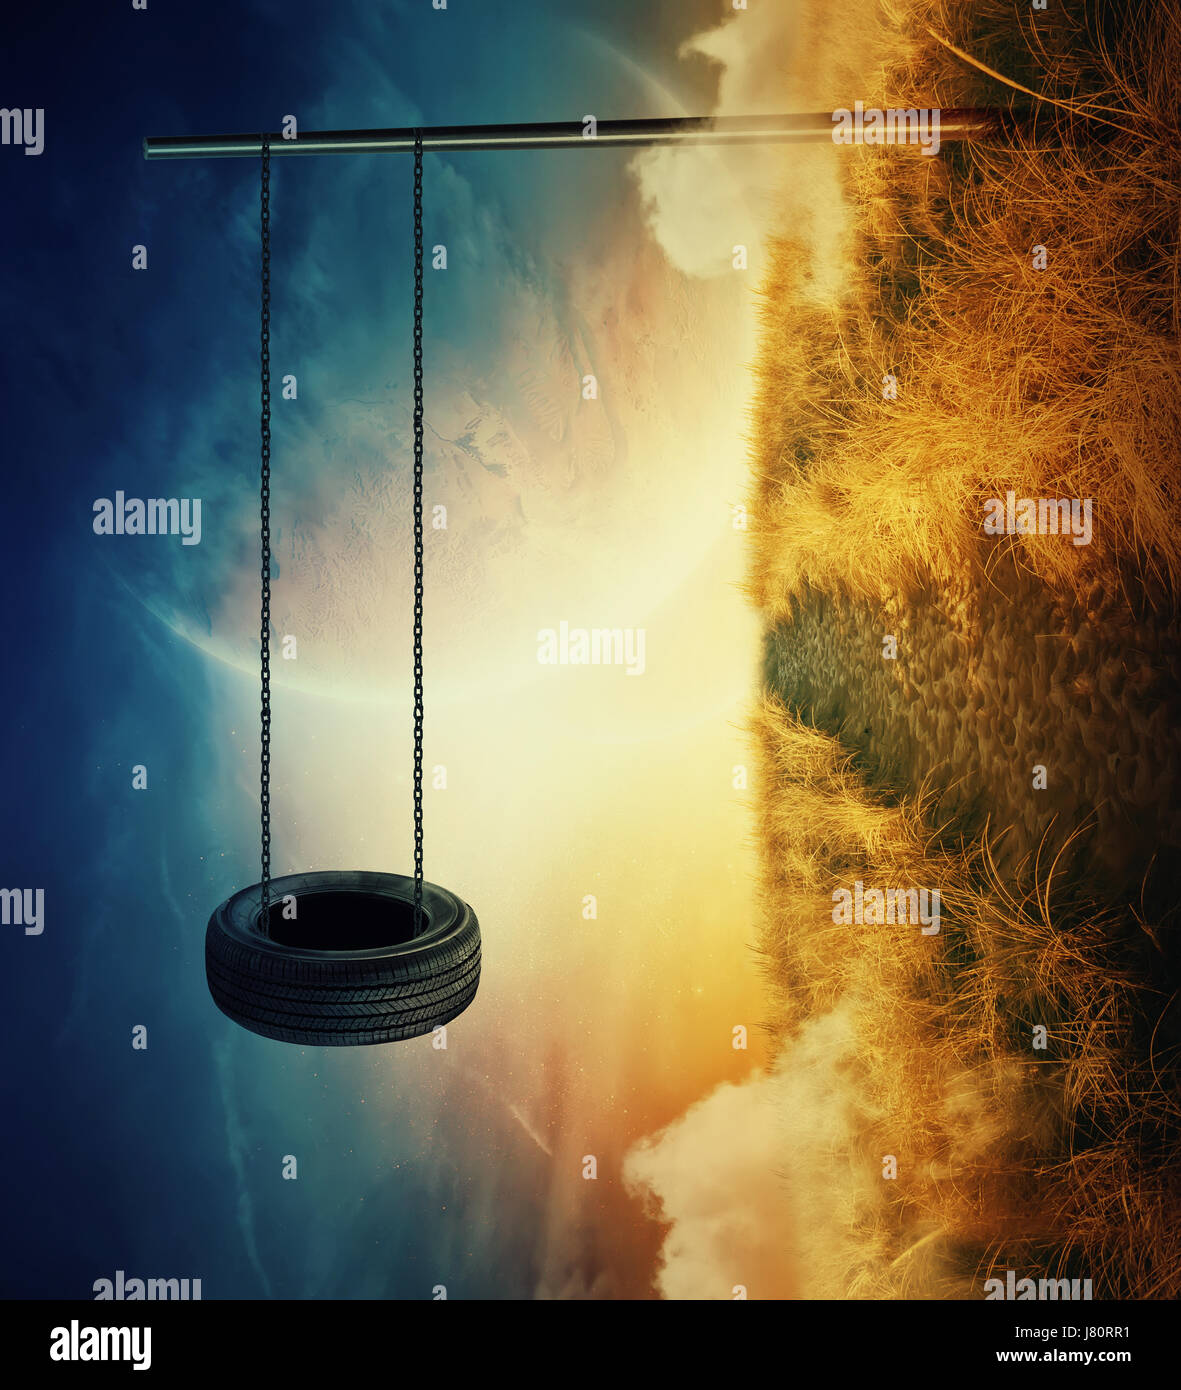 Suspended tire swing bound with a chain to a metallic pillar on a planet with different gravitation. Breaking the physical laws in the distant cosmos. Stock Photo